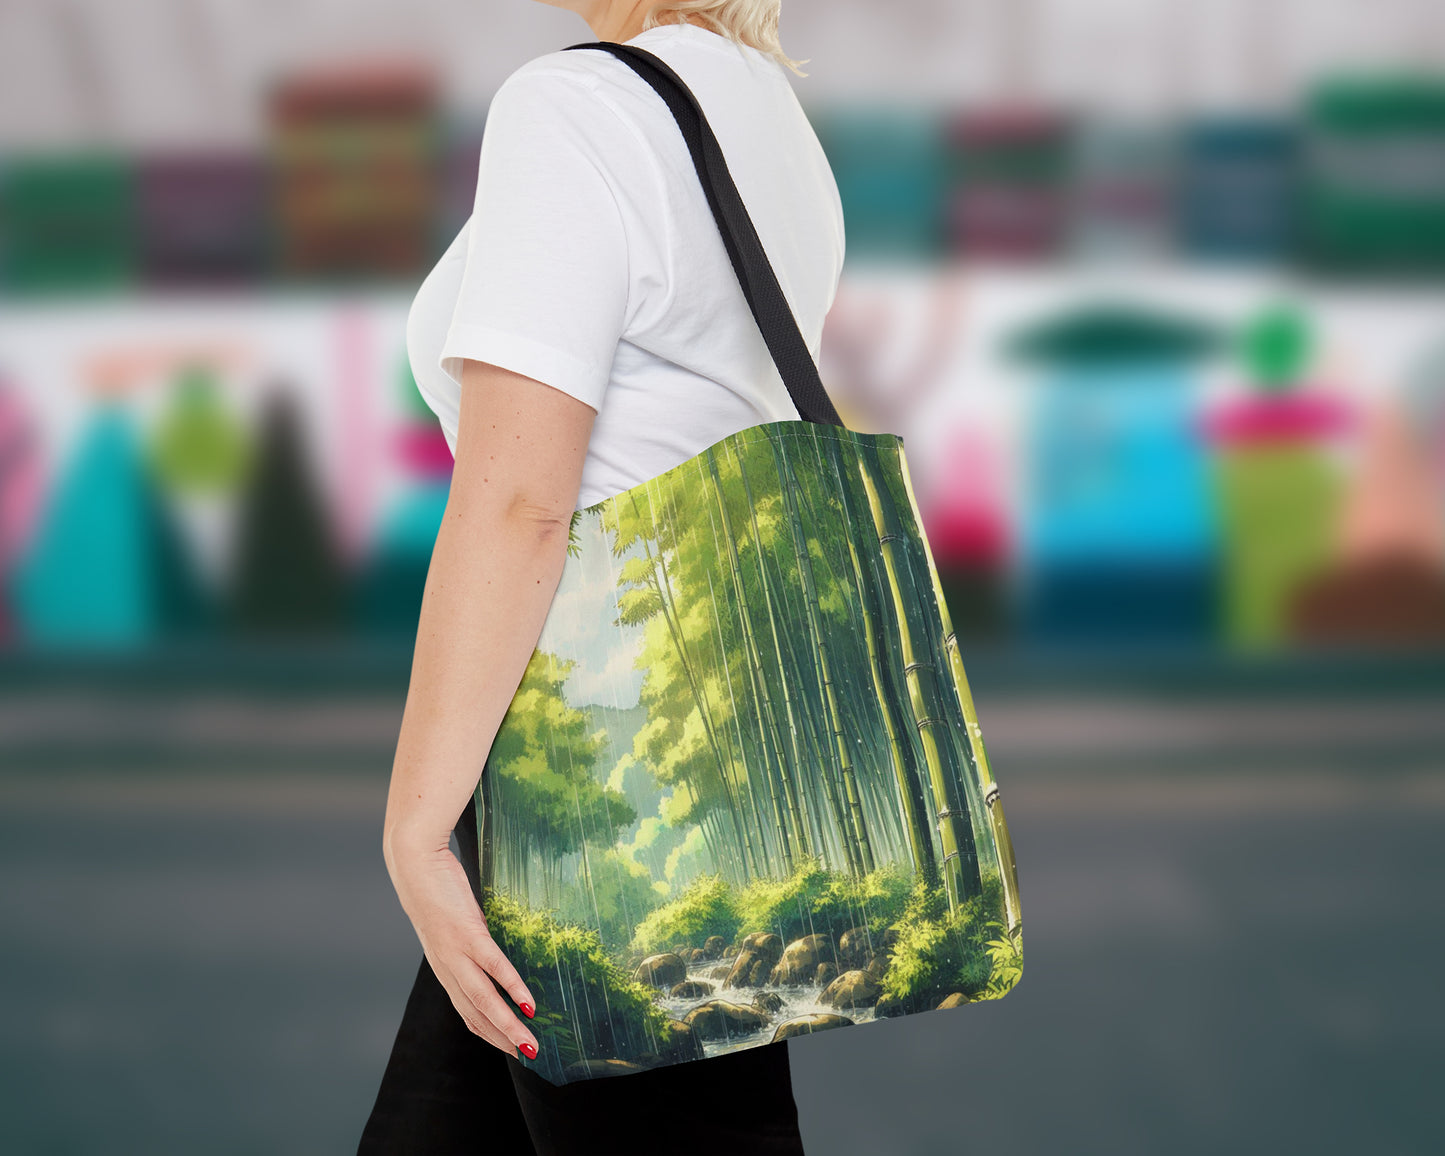 Bamboo forests in anime style tote bag